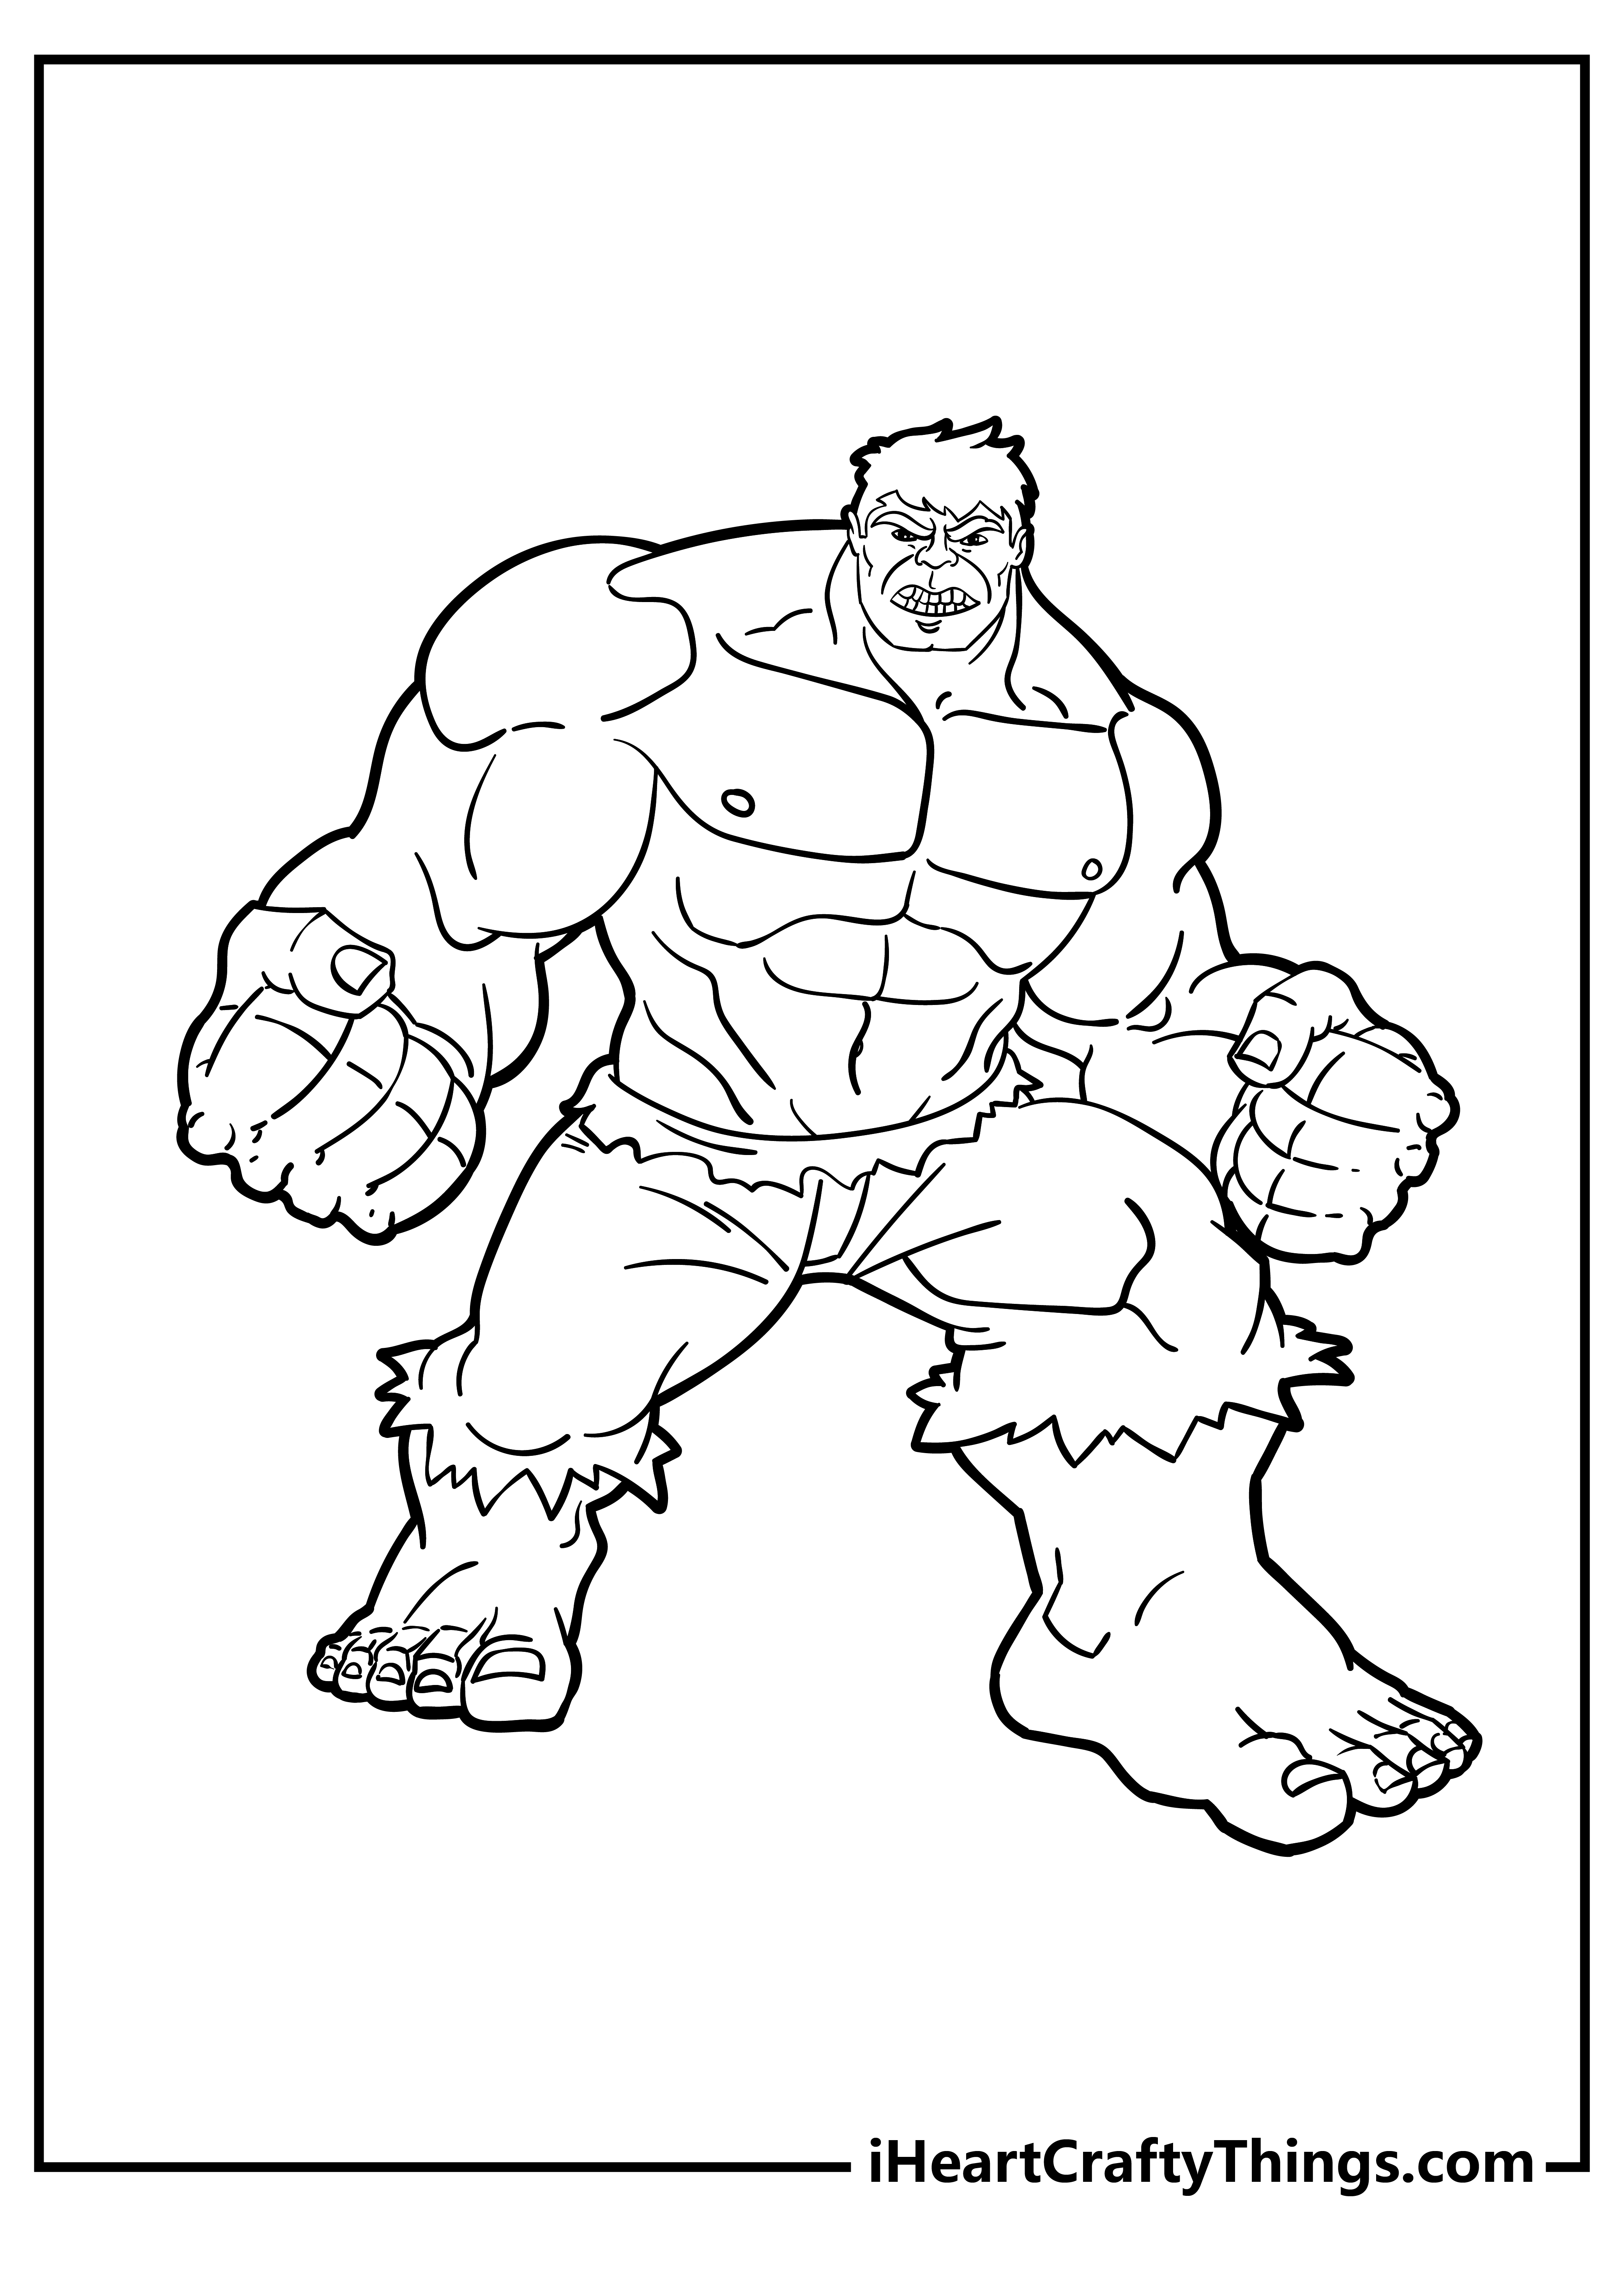 Printable Hulk Coloring Pages Updated 20